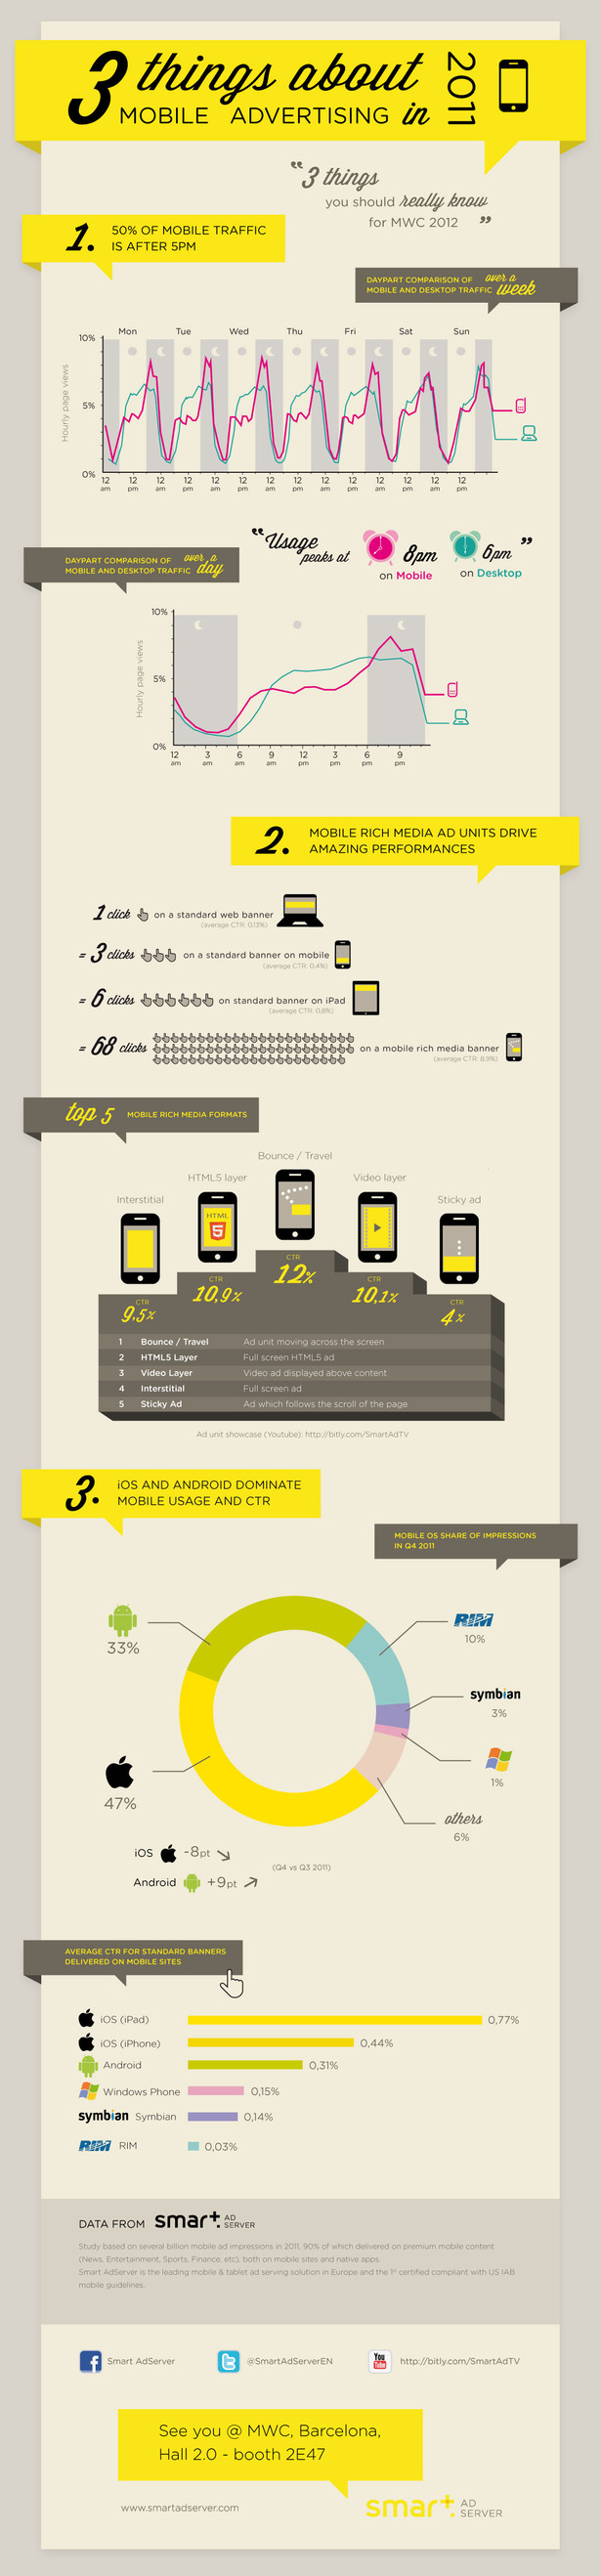 mobile-advertising-infographic